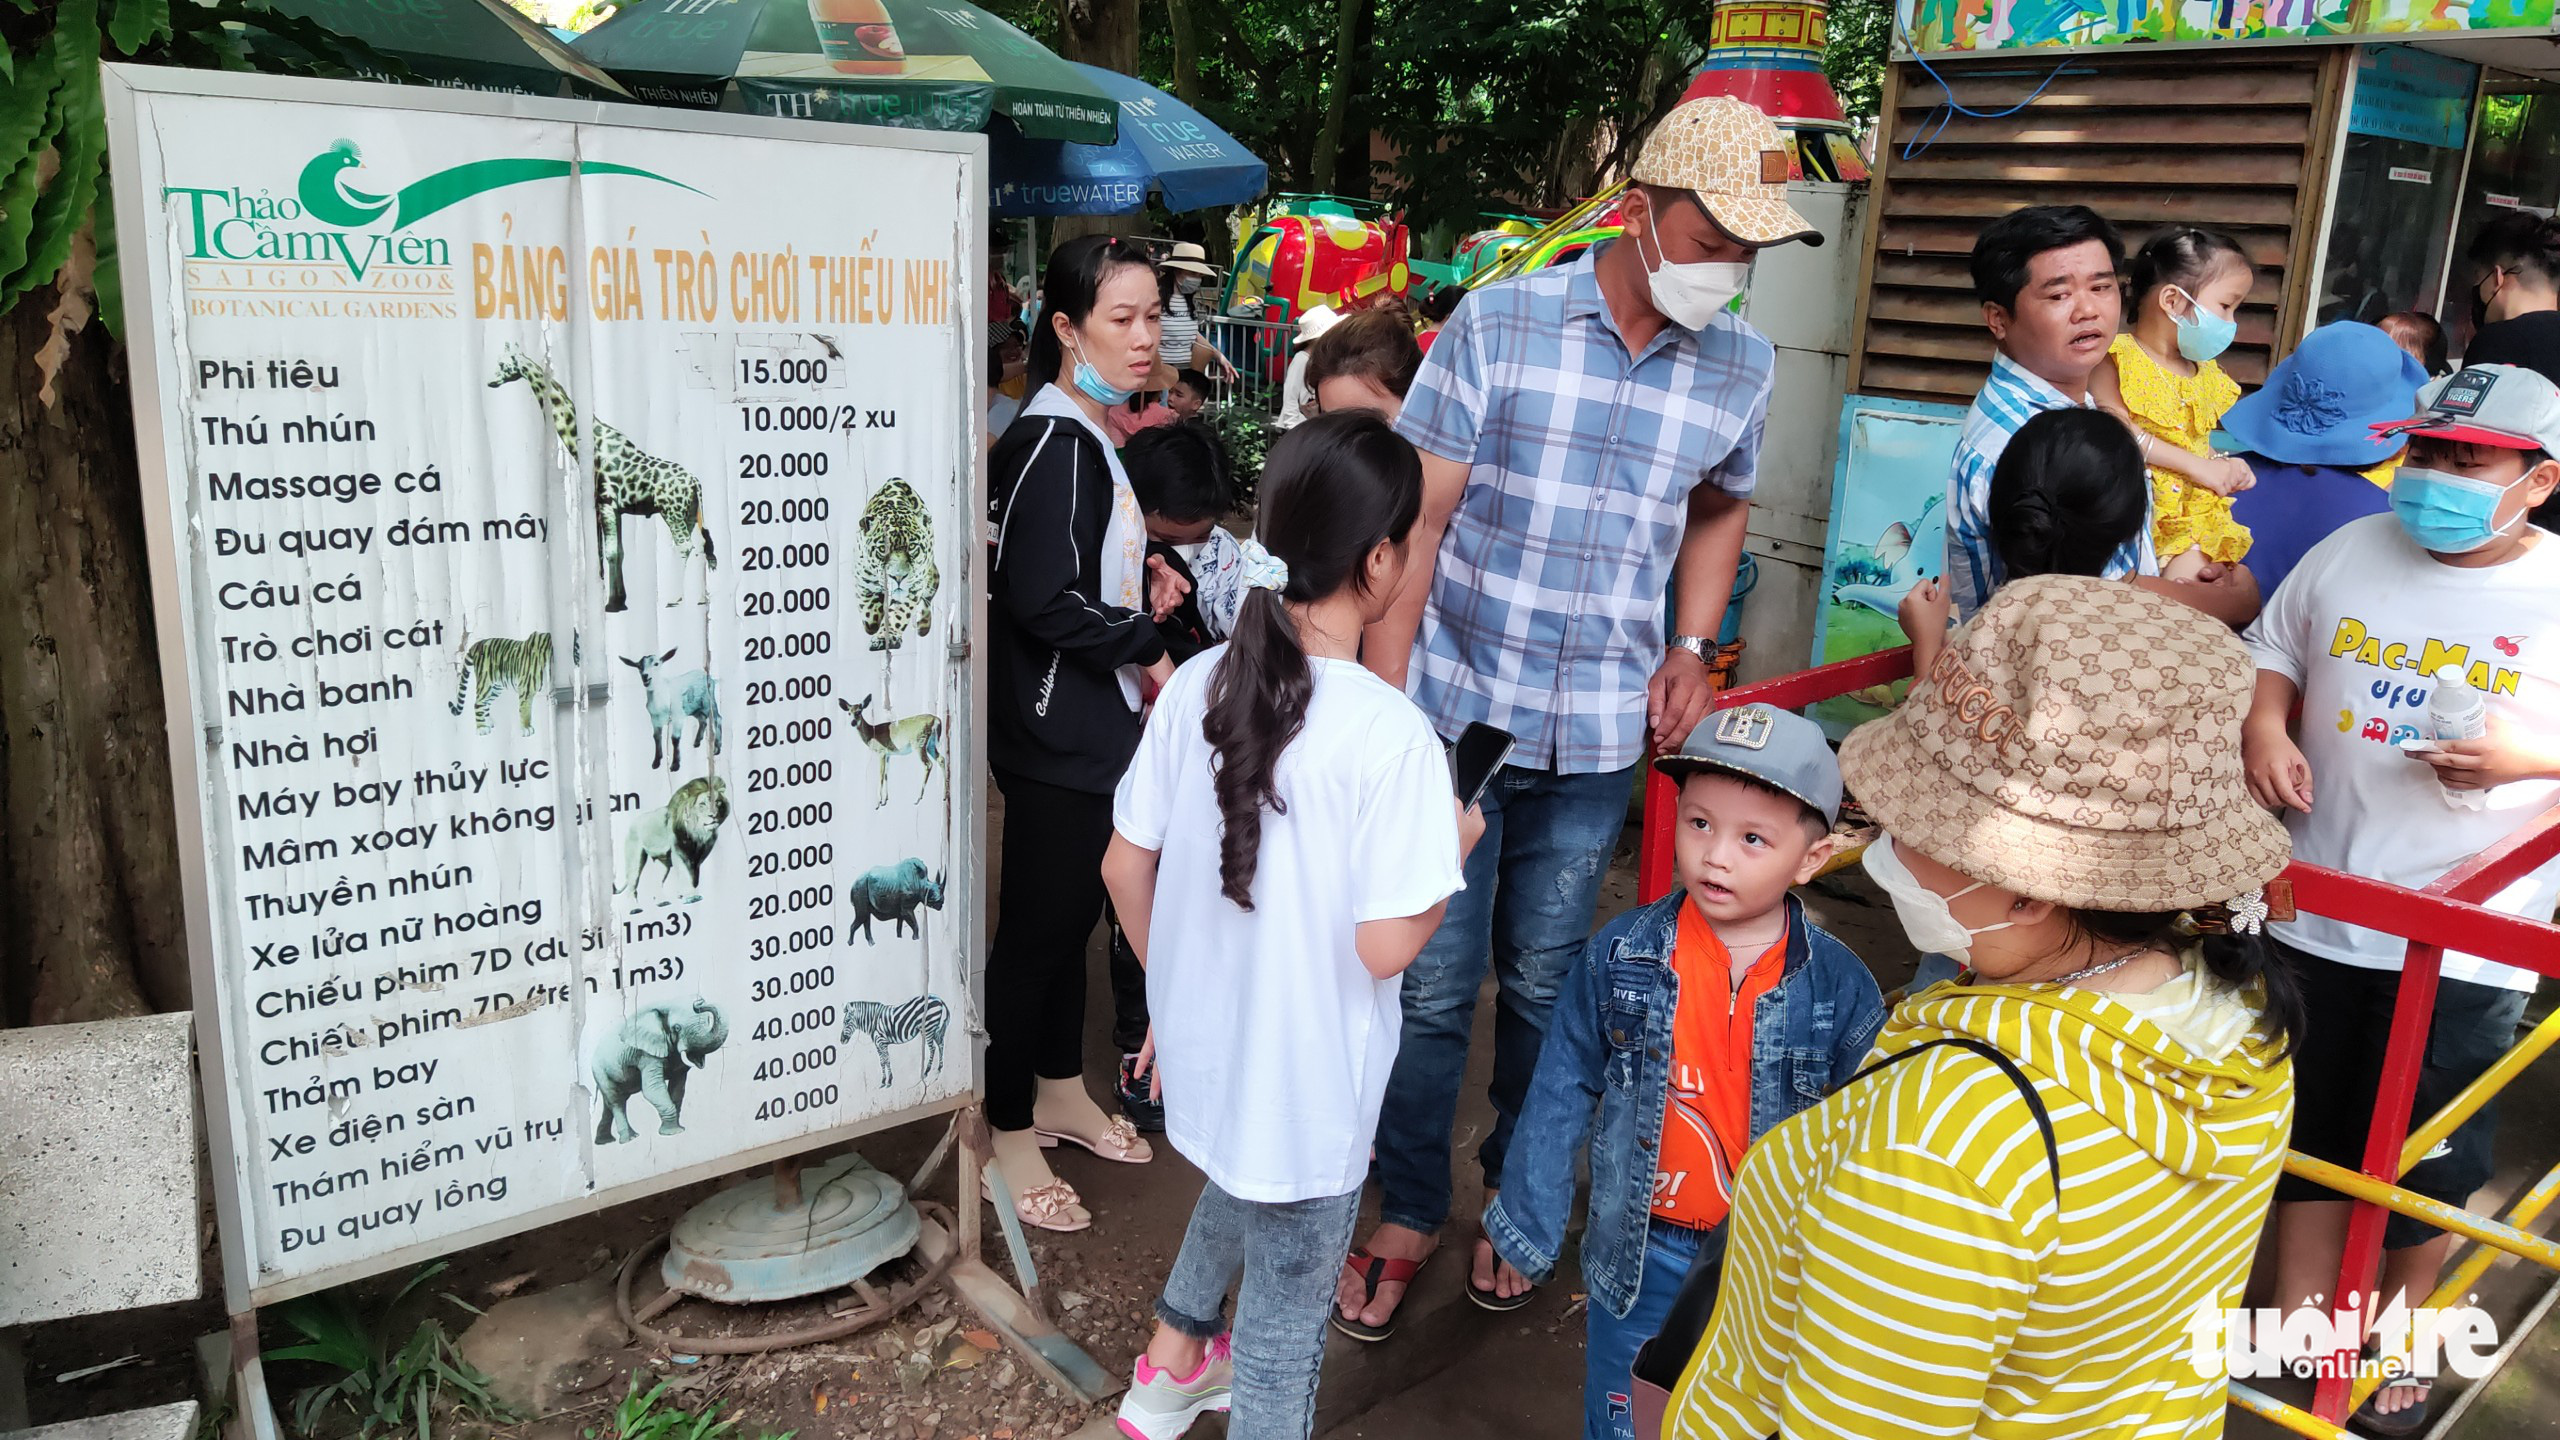 People visit the Saigon Zoo and Botanical Gardens in District 1, Ho Chi Minh City, July 17, 2022. Photo: N. Tri / Tuoi Tre